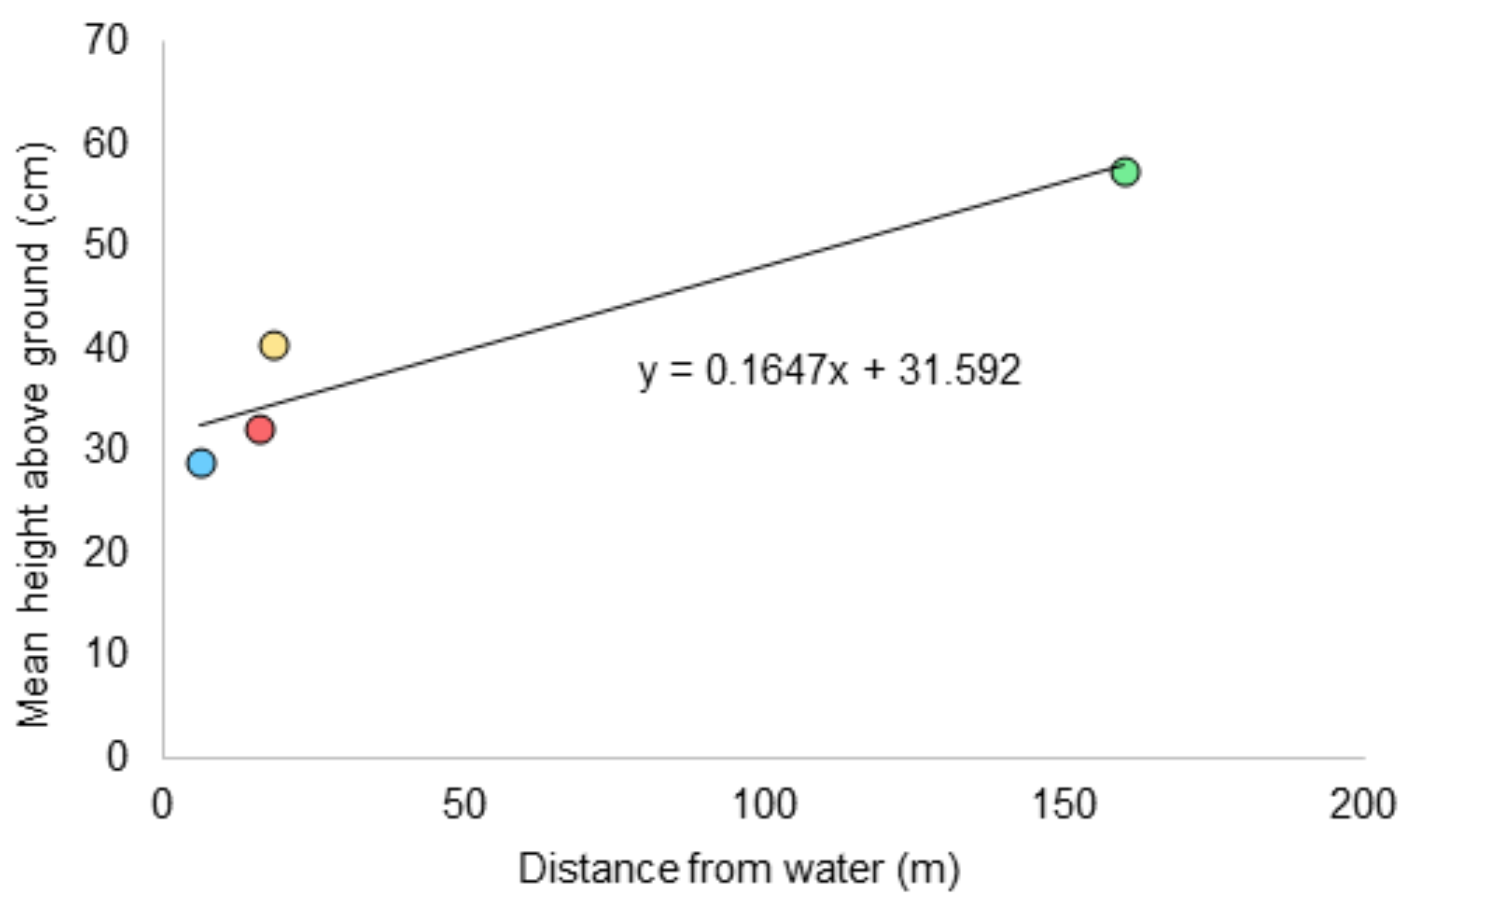 Figure 5: Scatter plot showing the relationship between mean height above ground of ants and distance from the nearest water body of four sites in Gunung Mulu National Park (R<sup>2</sup> = 0.90). Site 1 = yellow, Site 2 = red, Site 3 = blue, Site 4 = green